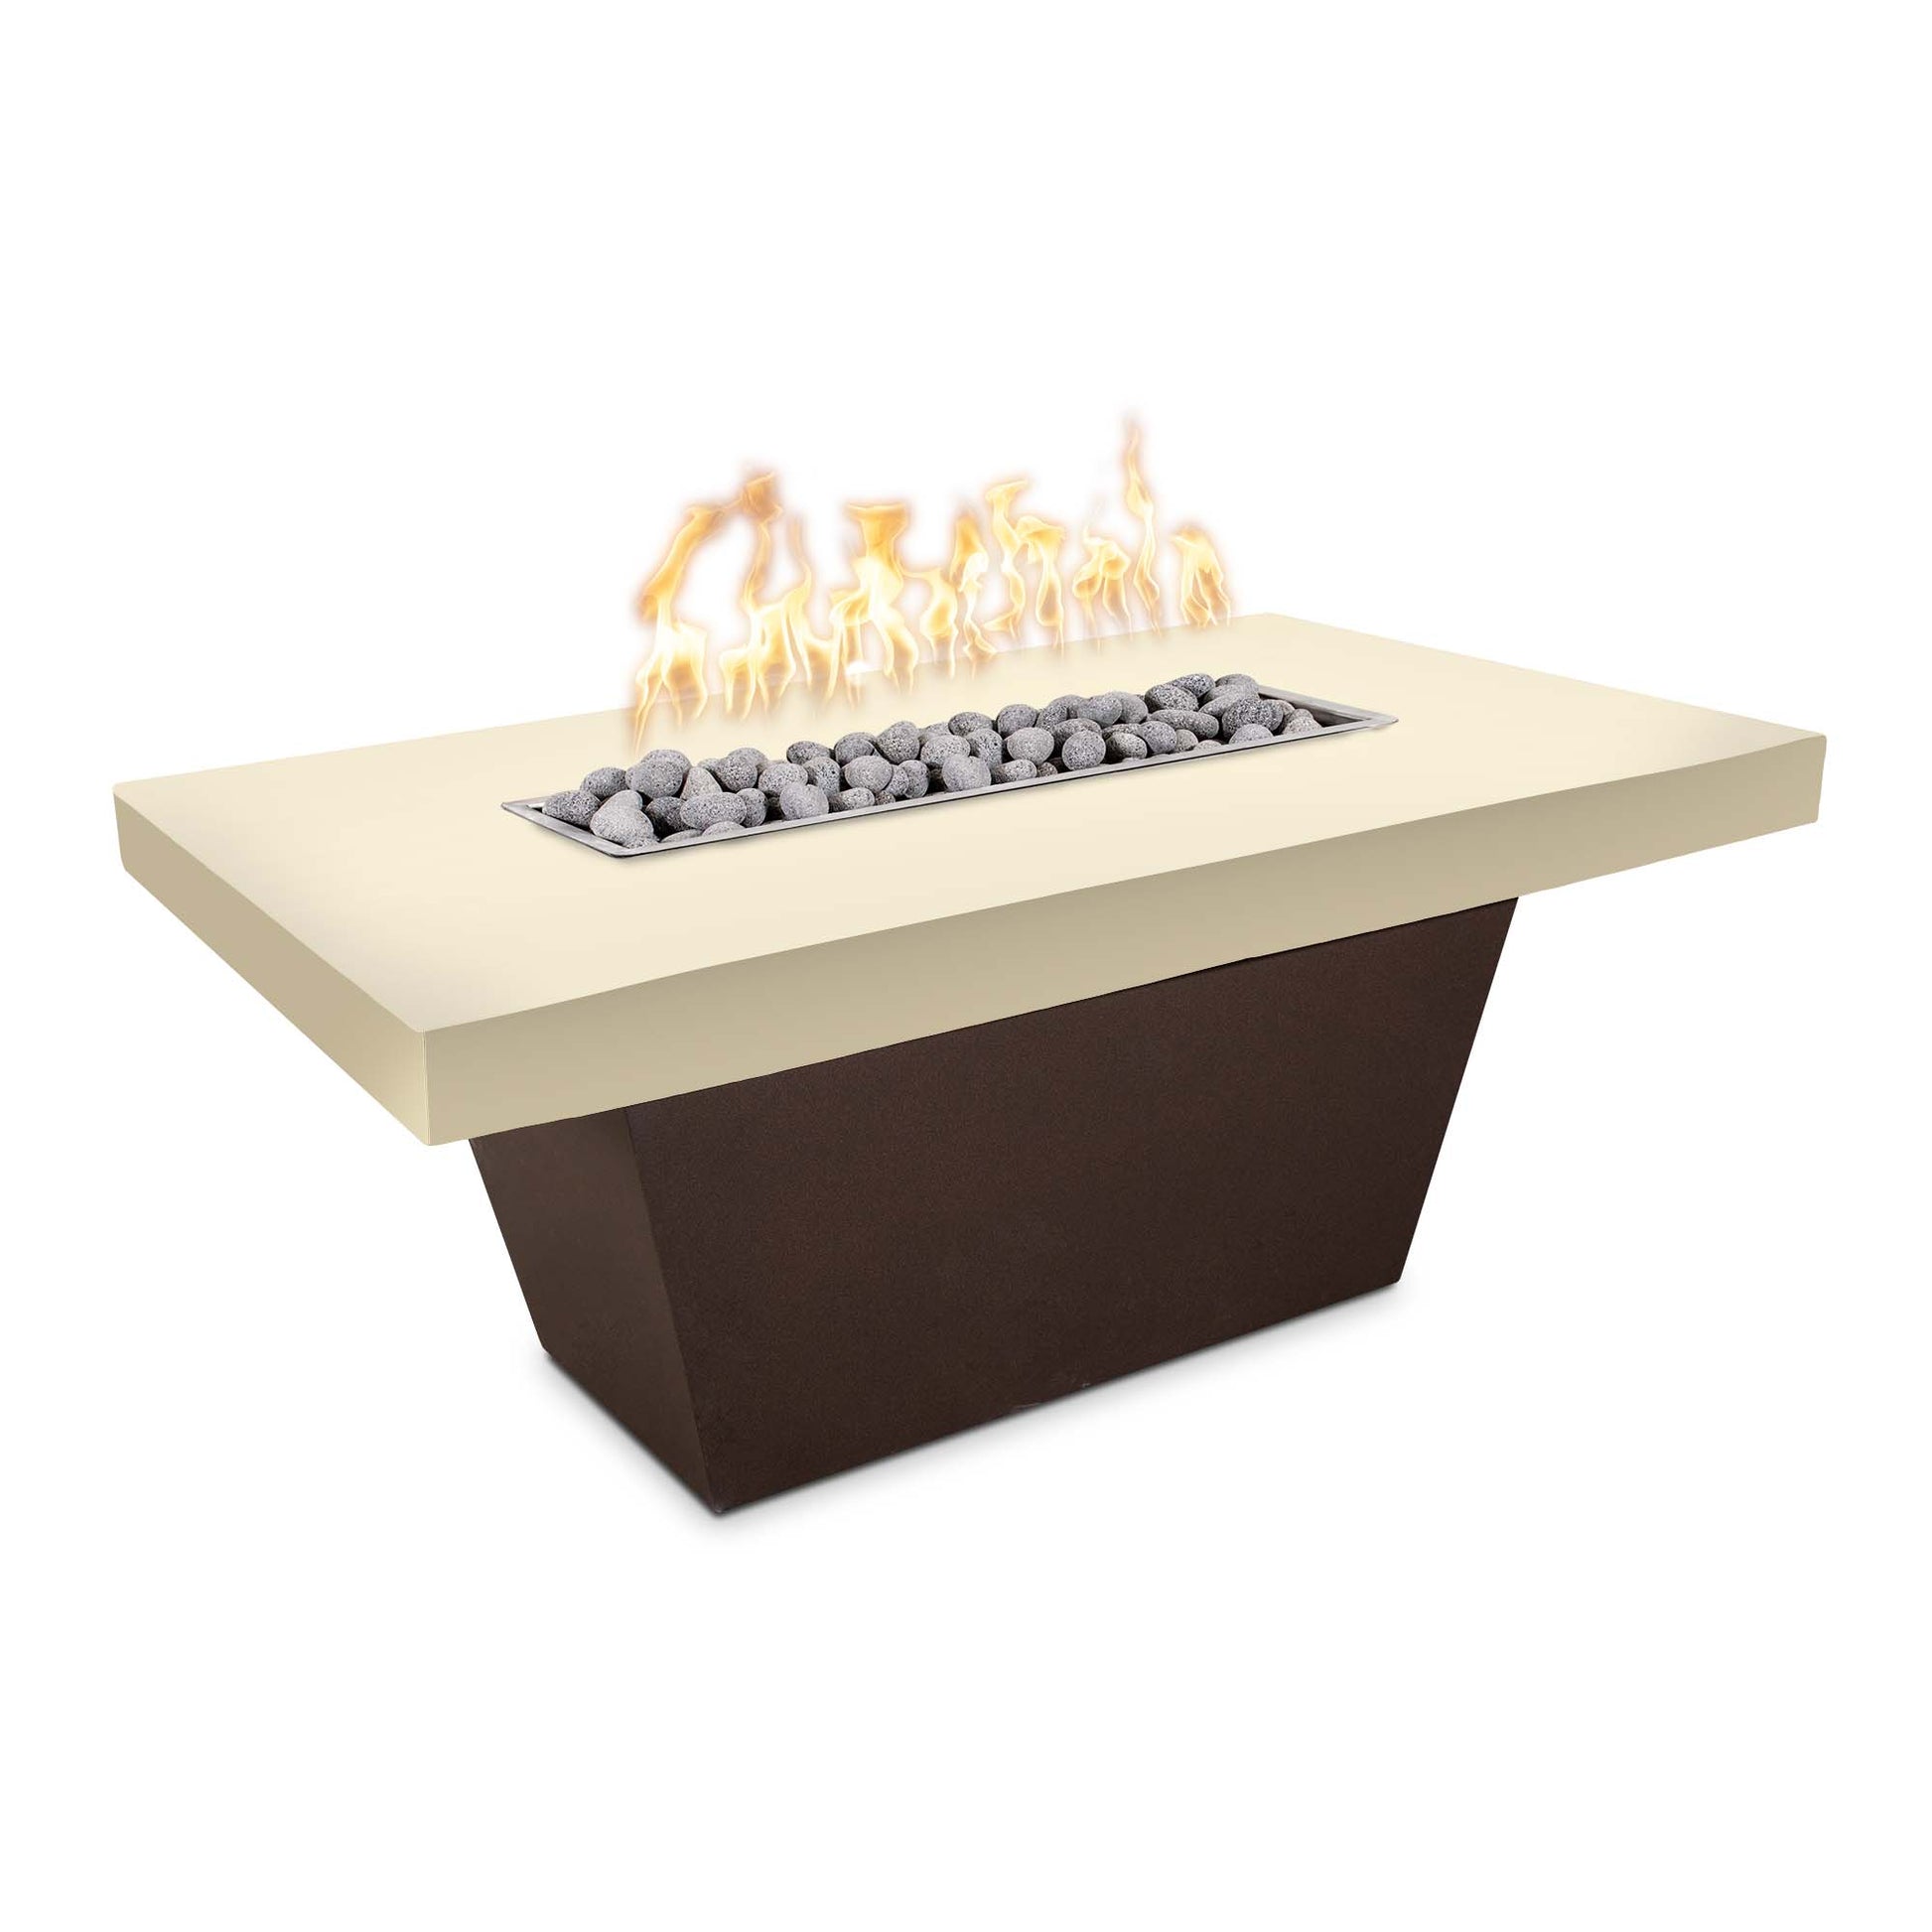 The Outdoor Plus Tacoma 48" Chestnut Concrete Top & Java Powder Coated Base Liquid Propane Fire Table with Match Lit Ignition